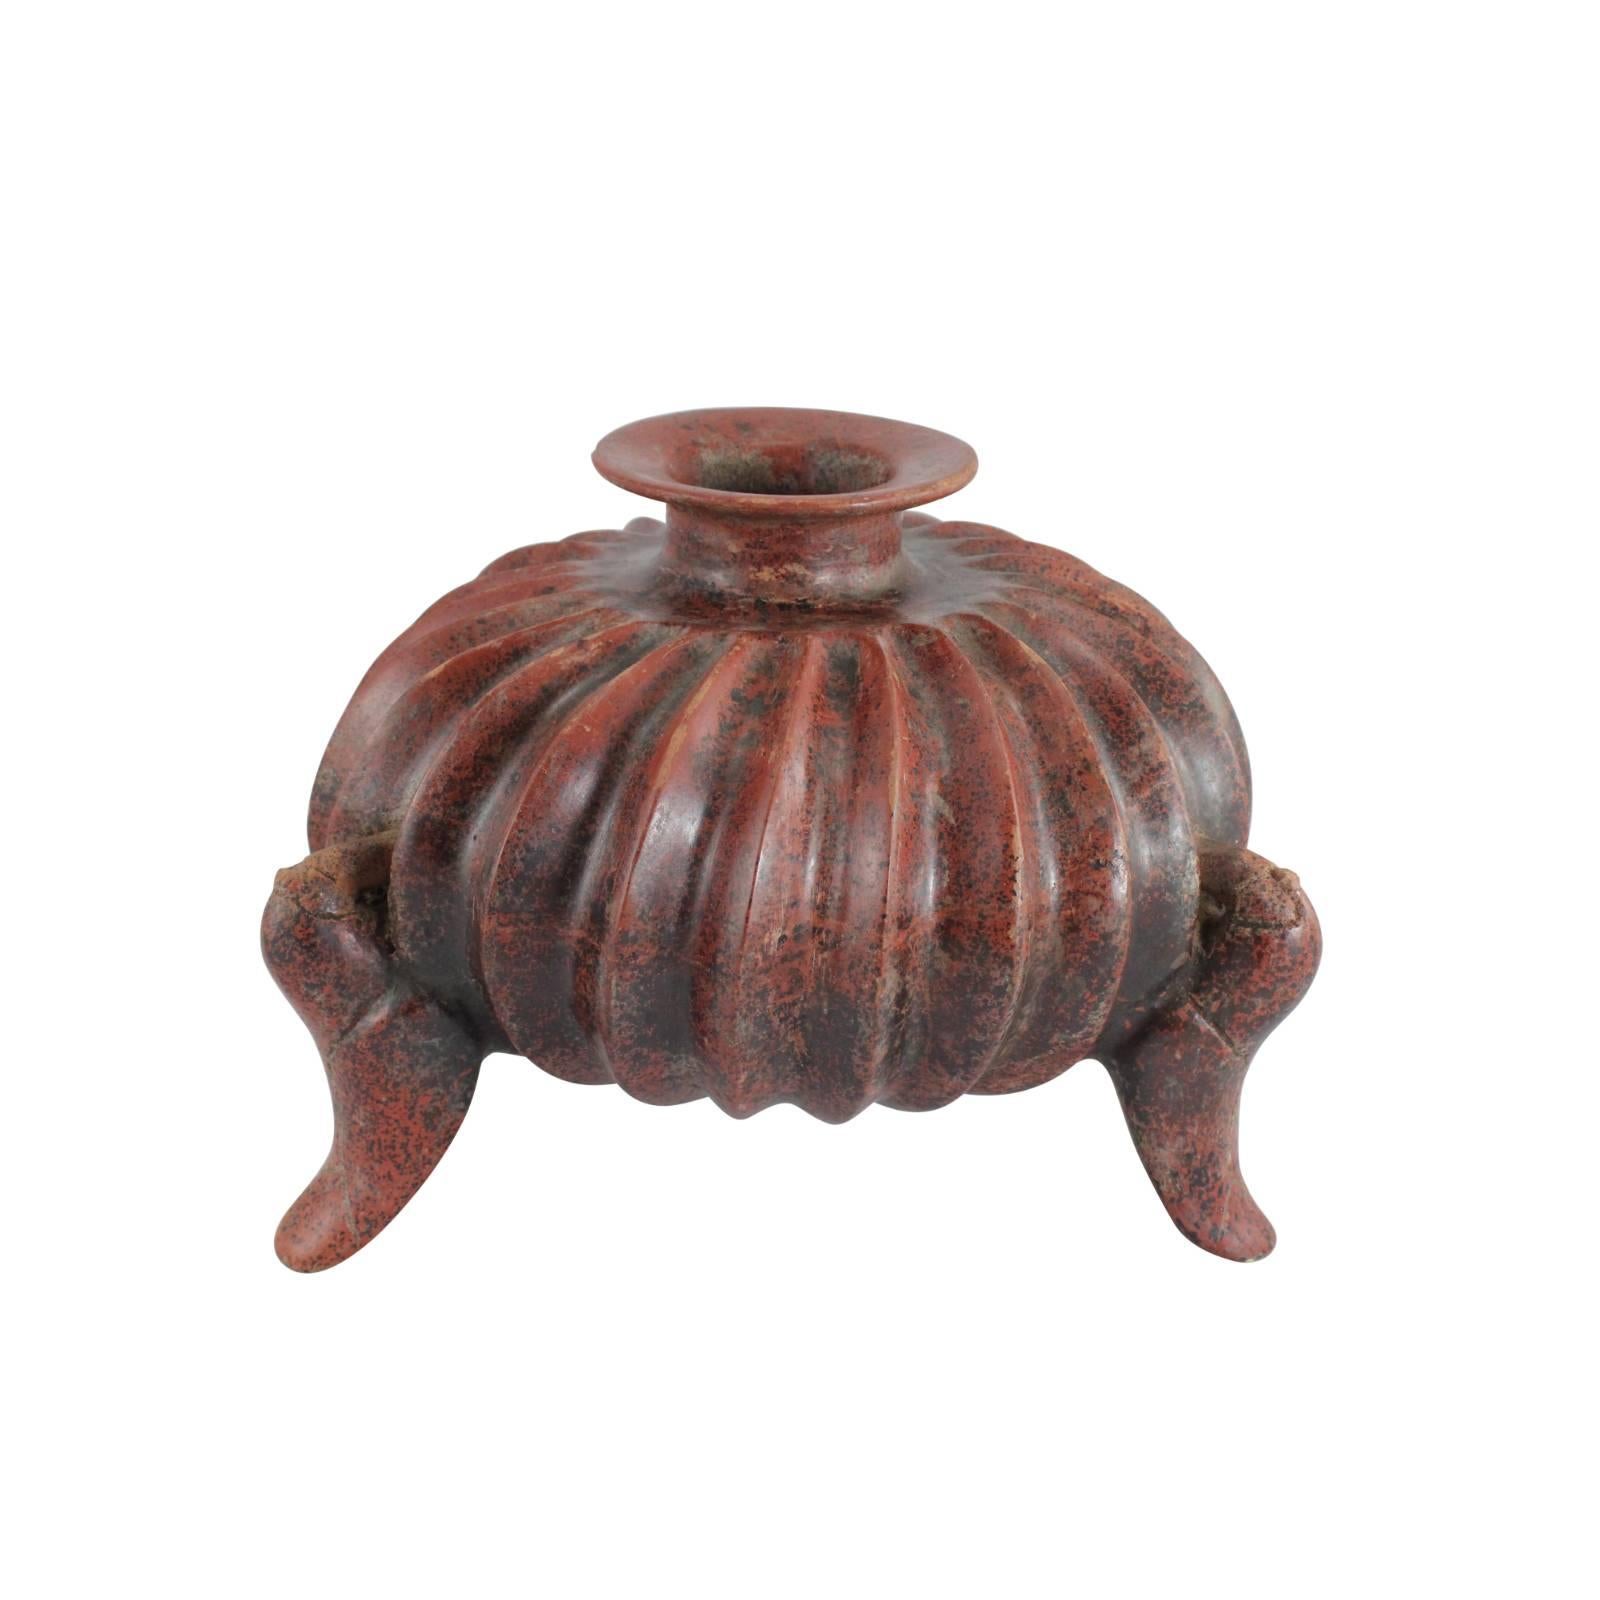 This curious slip-glazed earthenware vessel originated from Pre-Columbian Colima between 200 and 300 BC. The ridging along the sides, called gadrooning, mimics naturalistic forms. Three legs uphold the vessel, which is slipped red and burnished to a